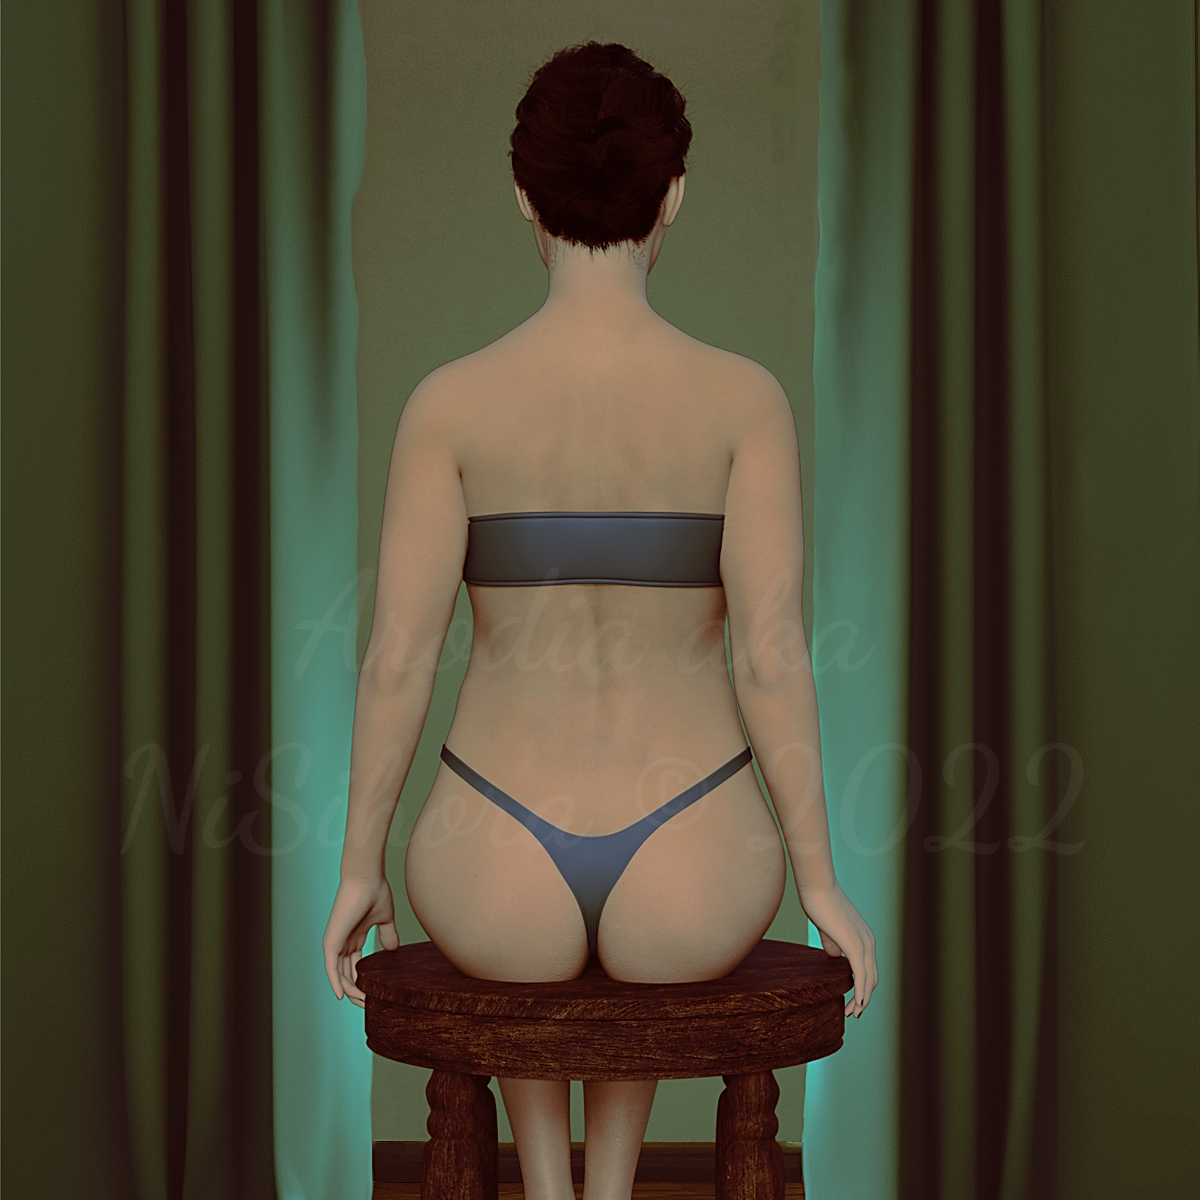 A #daz3d render with some postwork by me. The pose and the small table are park of a pack available here: bit.ly/3obIwlS , there is a free morph pack for the table here :  bit.ly/3uJXB2a

#Daz3D #3drender #3drendering #genesis8female #g8f #g8fposes #daz3dgirl